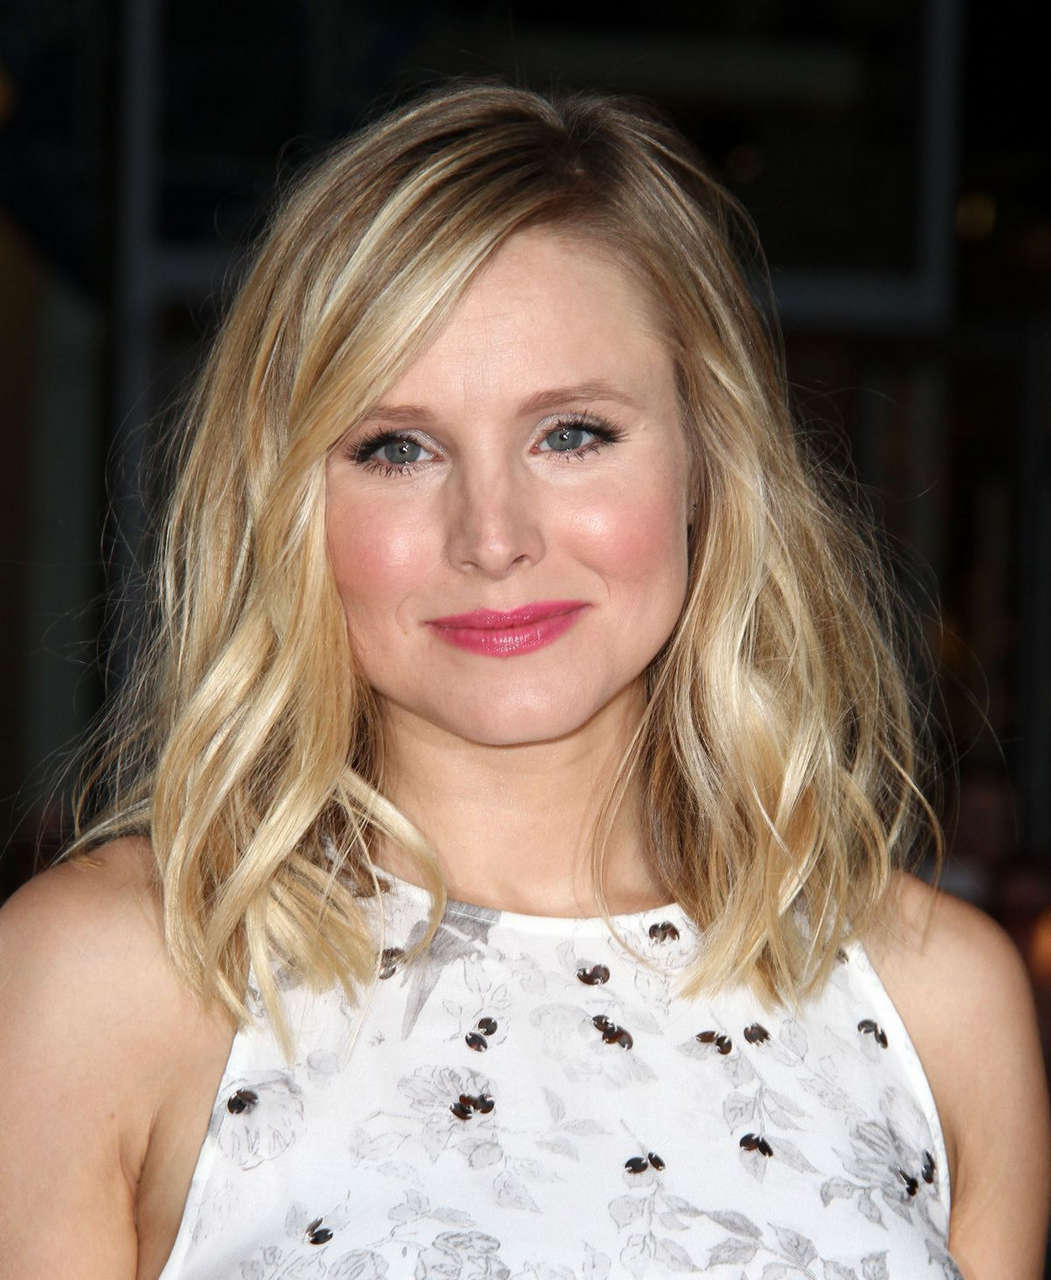 Kristen Bell This Is Where I Leave You Premiere Hollywood